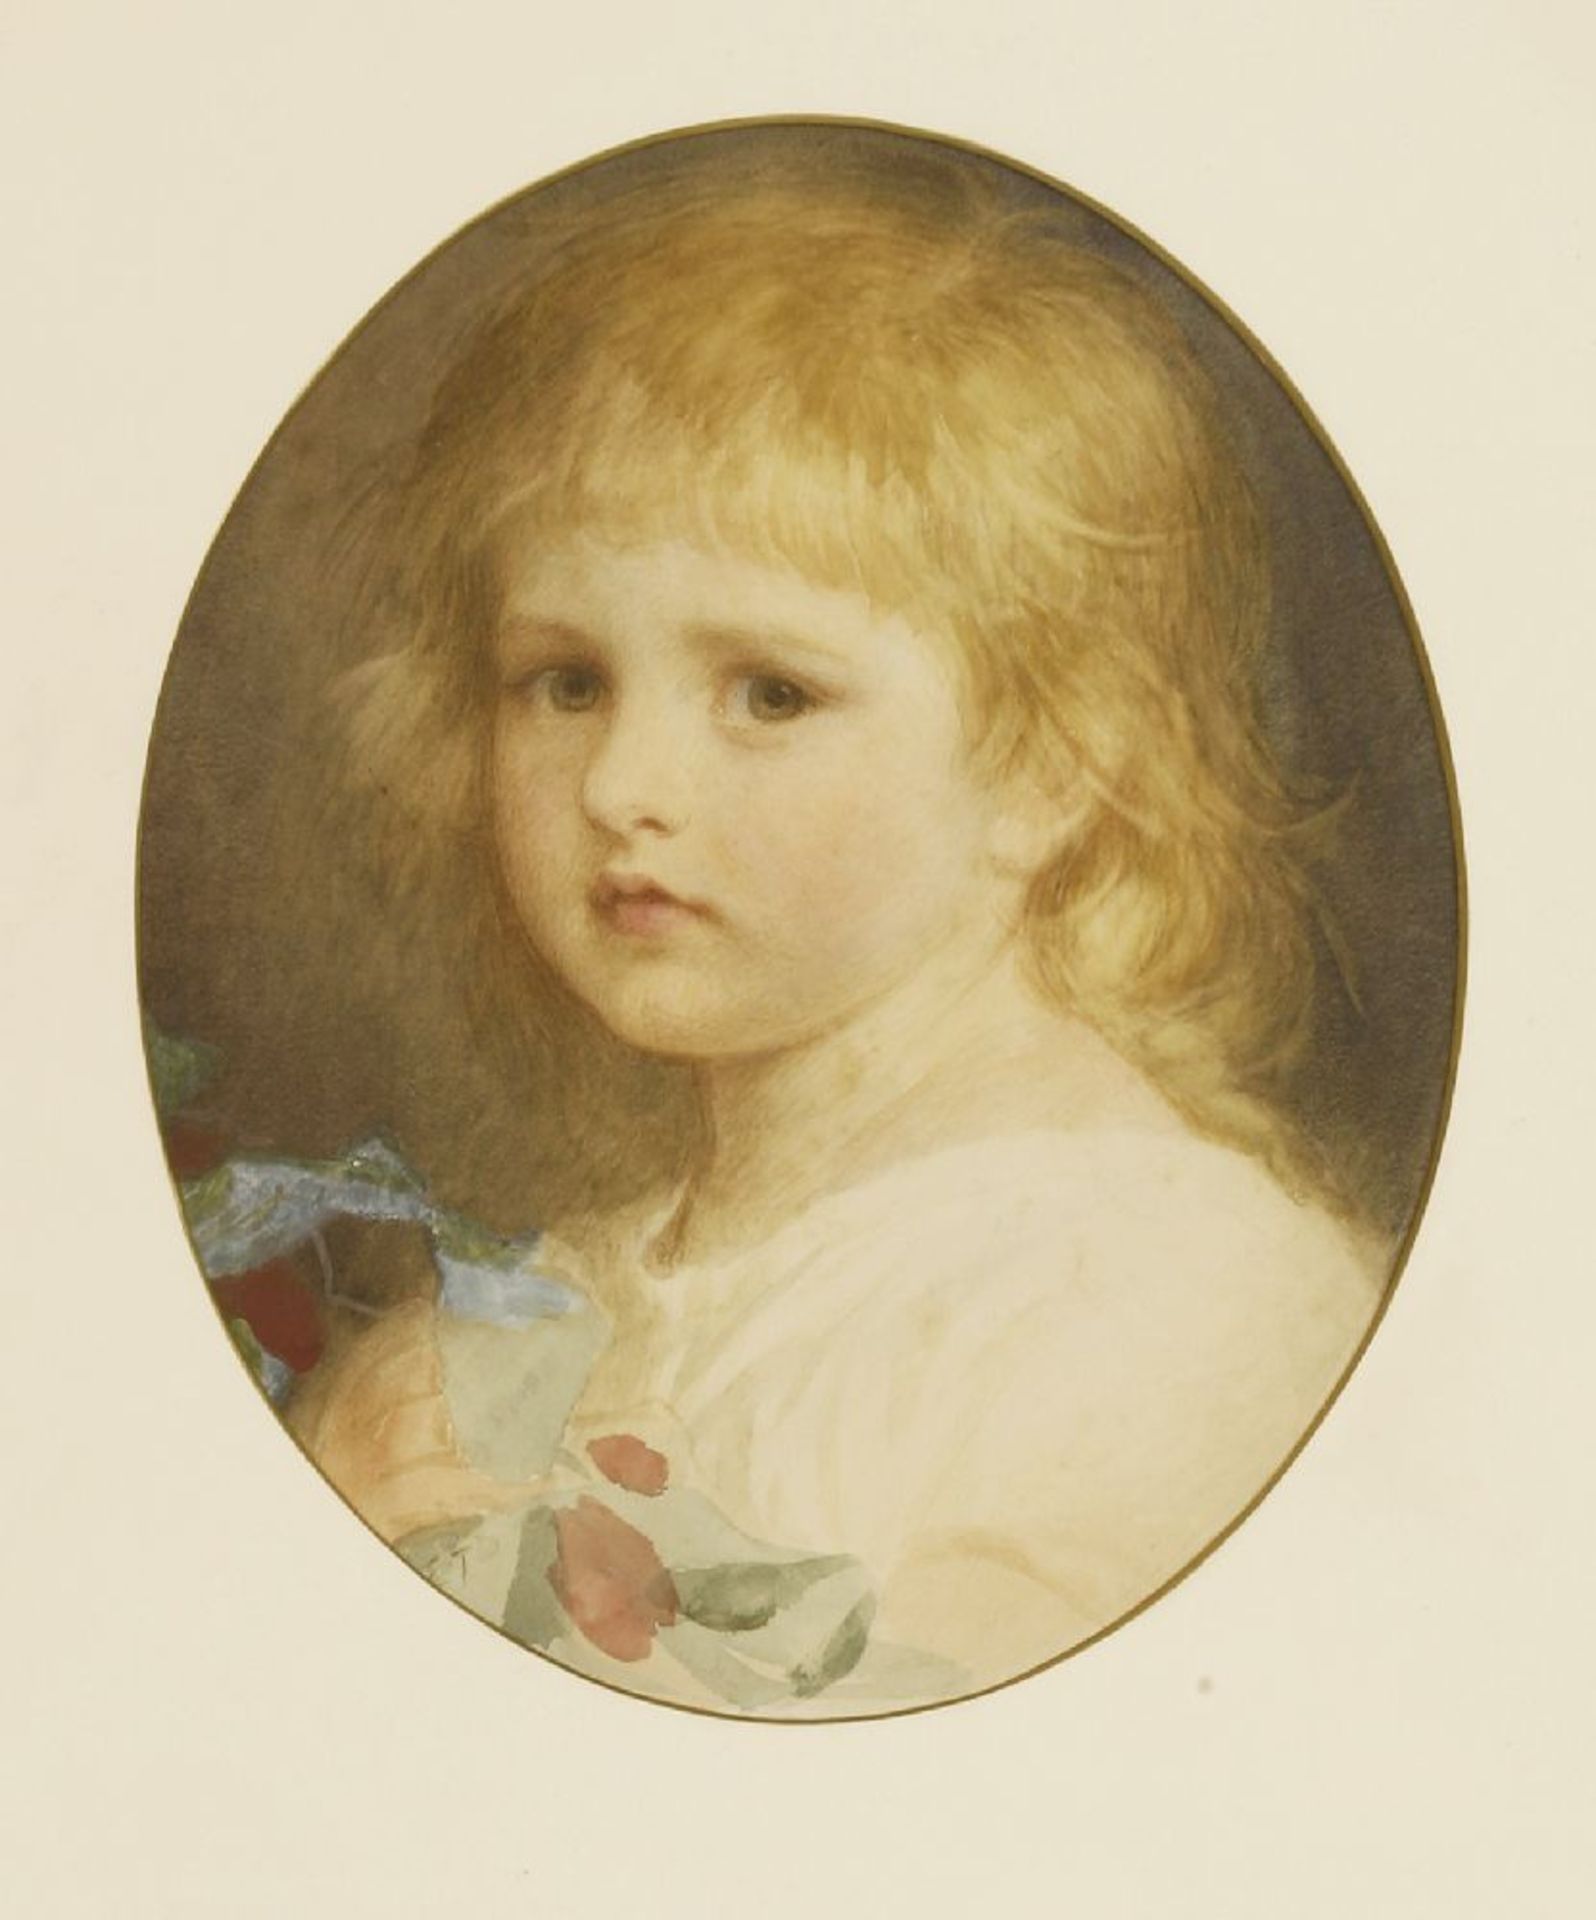 English School, late 19th centuryPORTRAIT OF A YOUNG GIRL, BUST LENGTH, IN A WHITE DRESSSigned